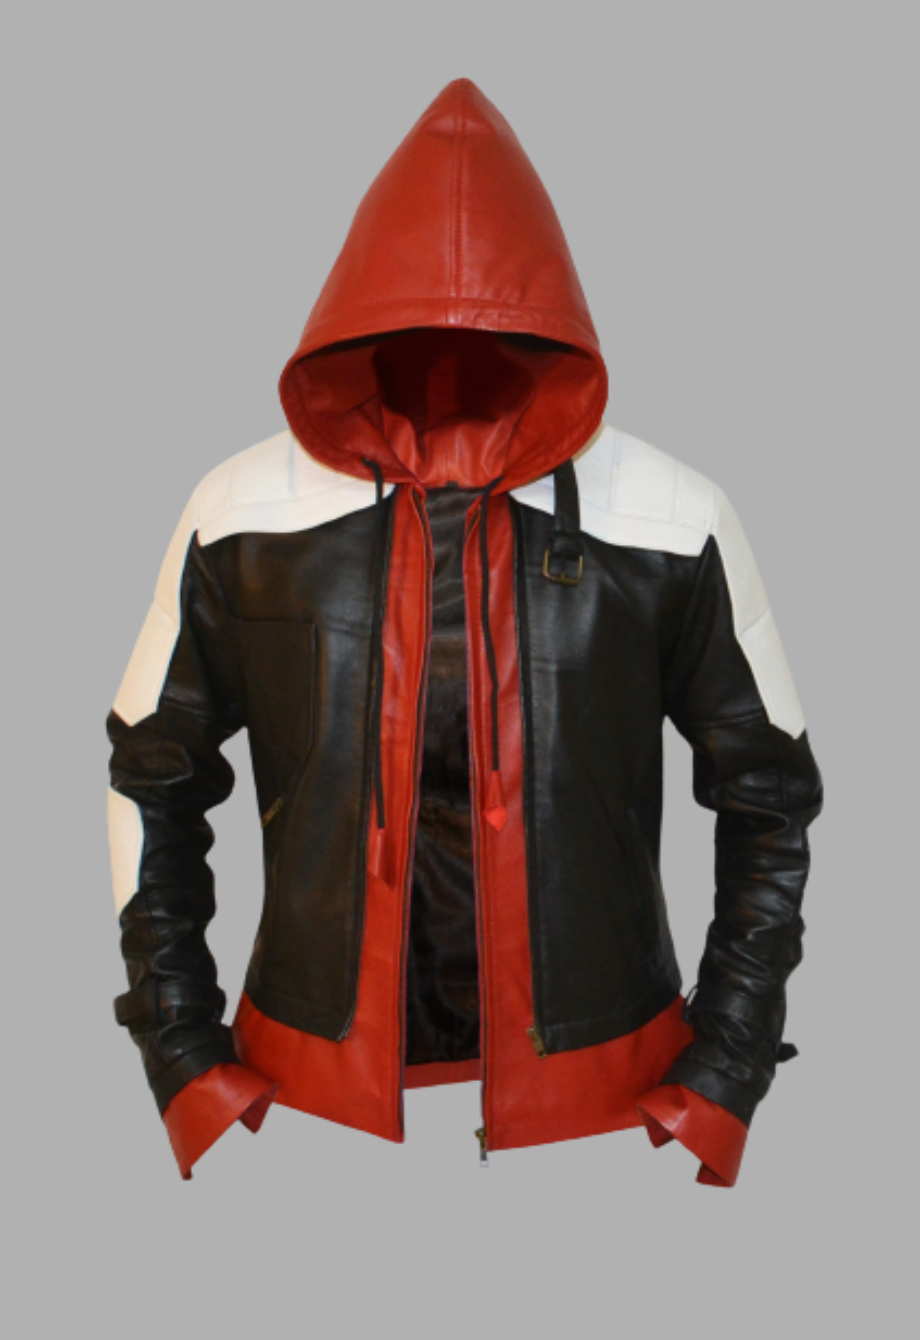 Unique Style Moto Genuine Sheep Leather Jacket in Red Design and Stylish Zip S / Black